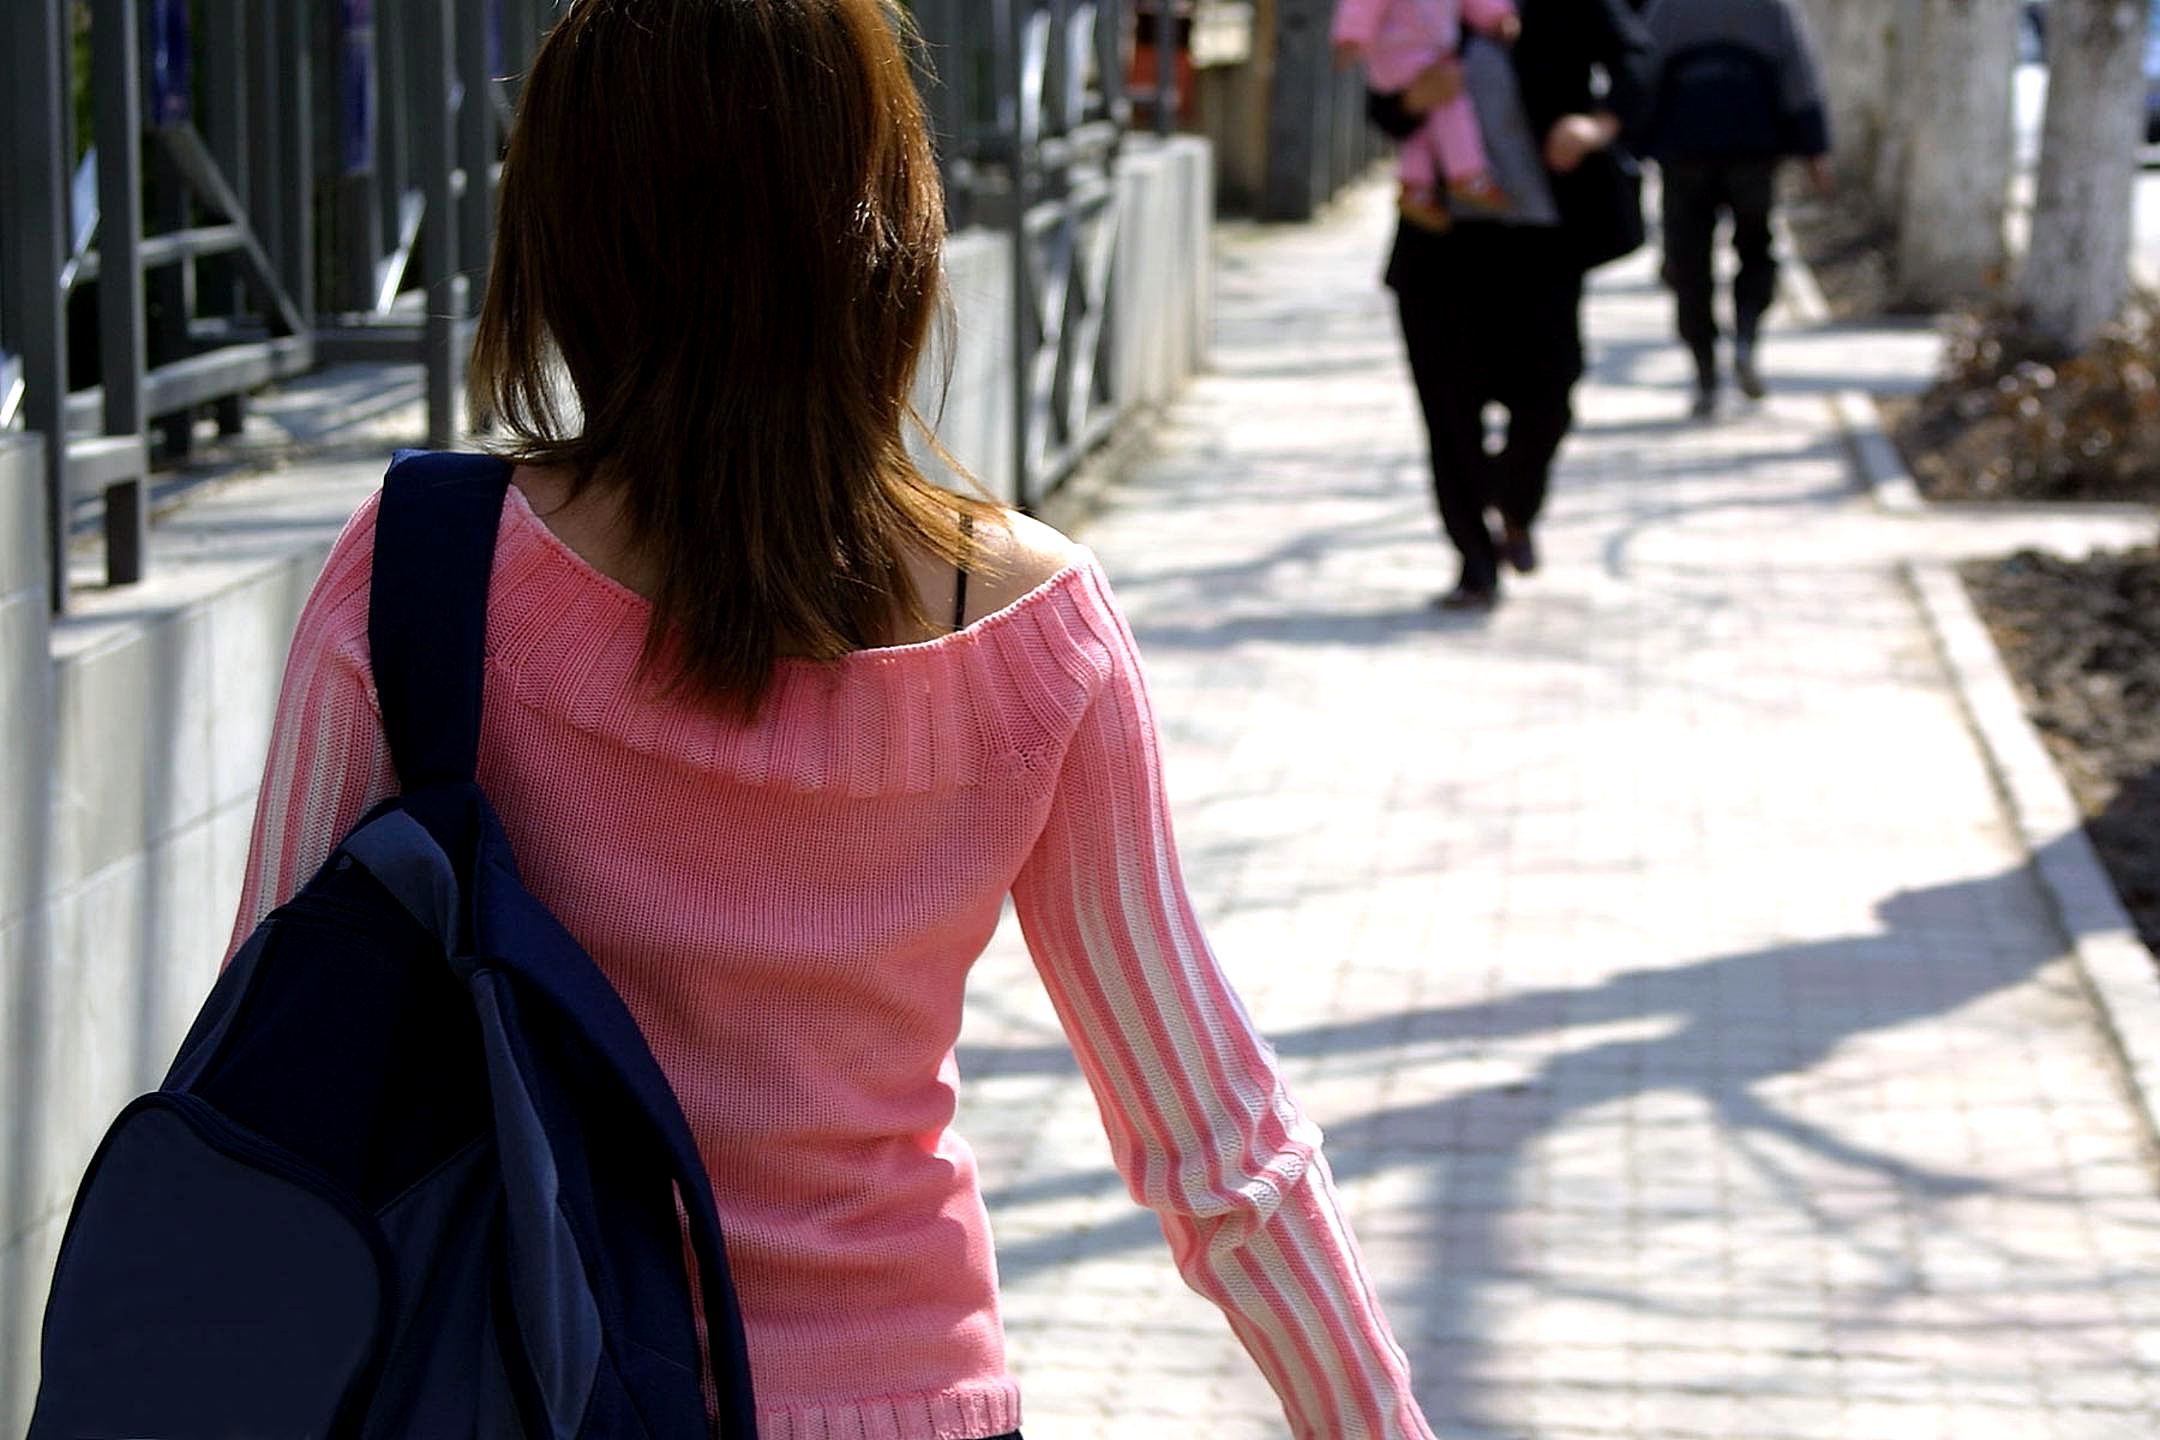 image shows a woman walking away from the camera